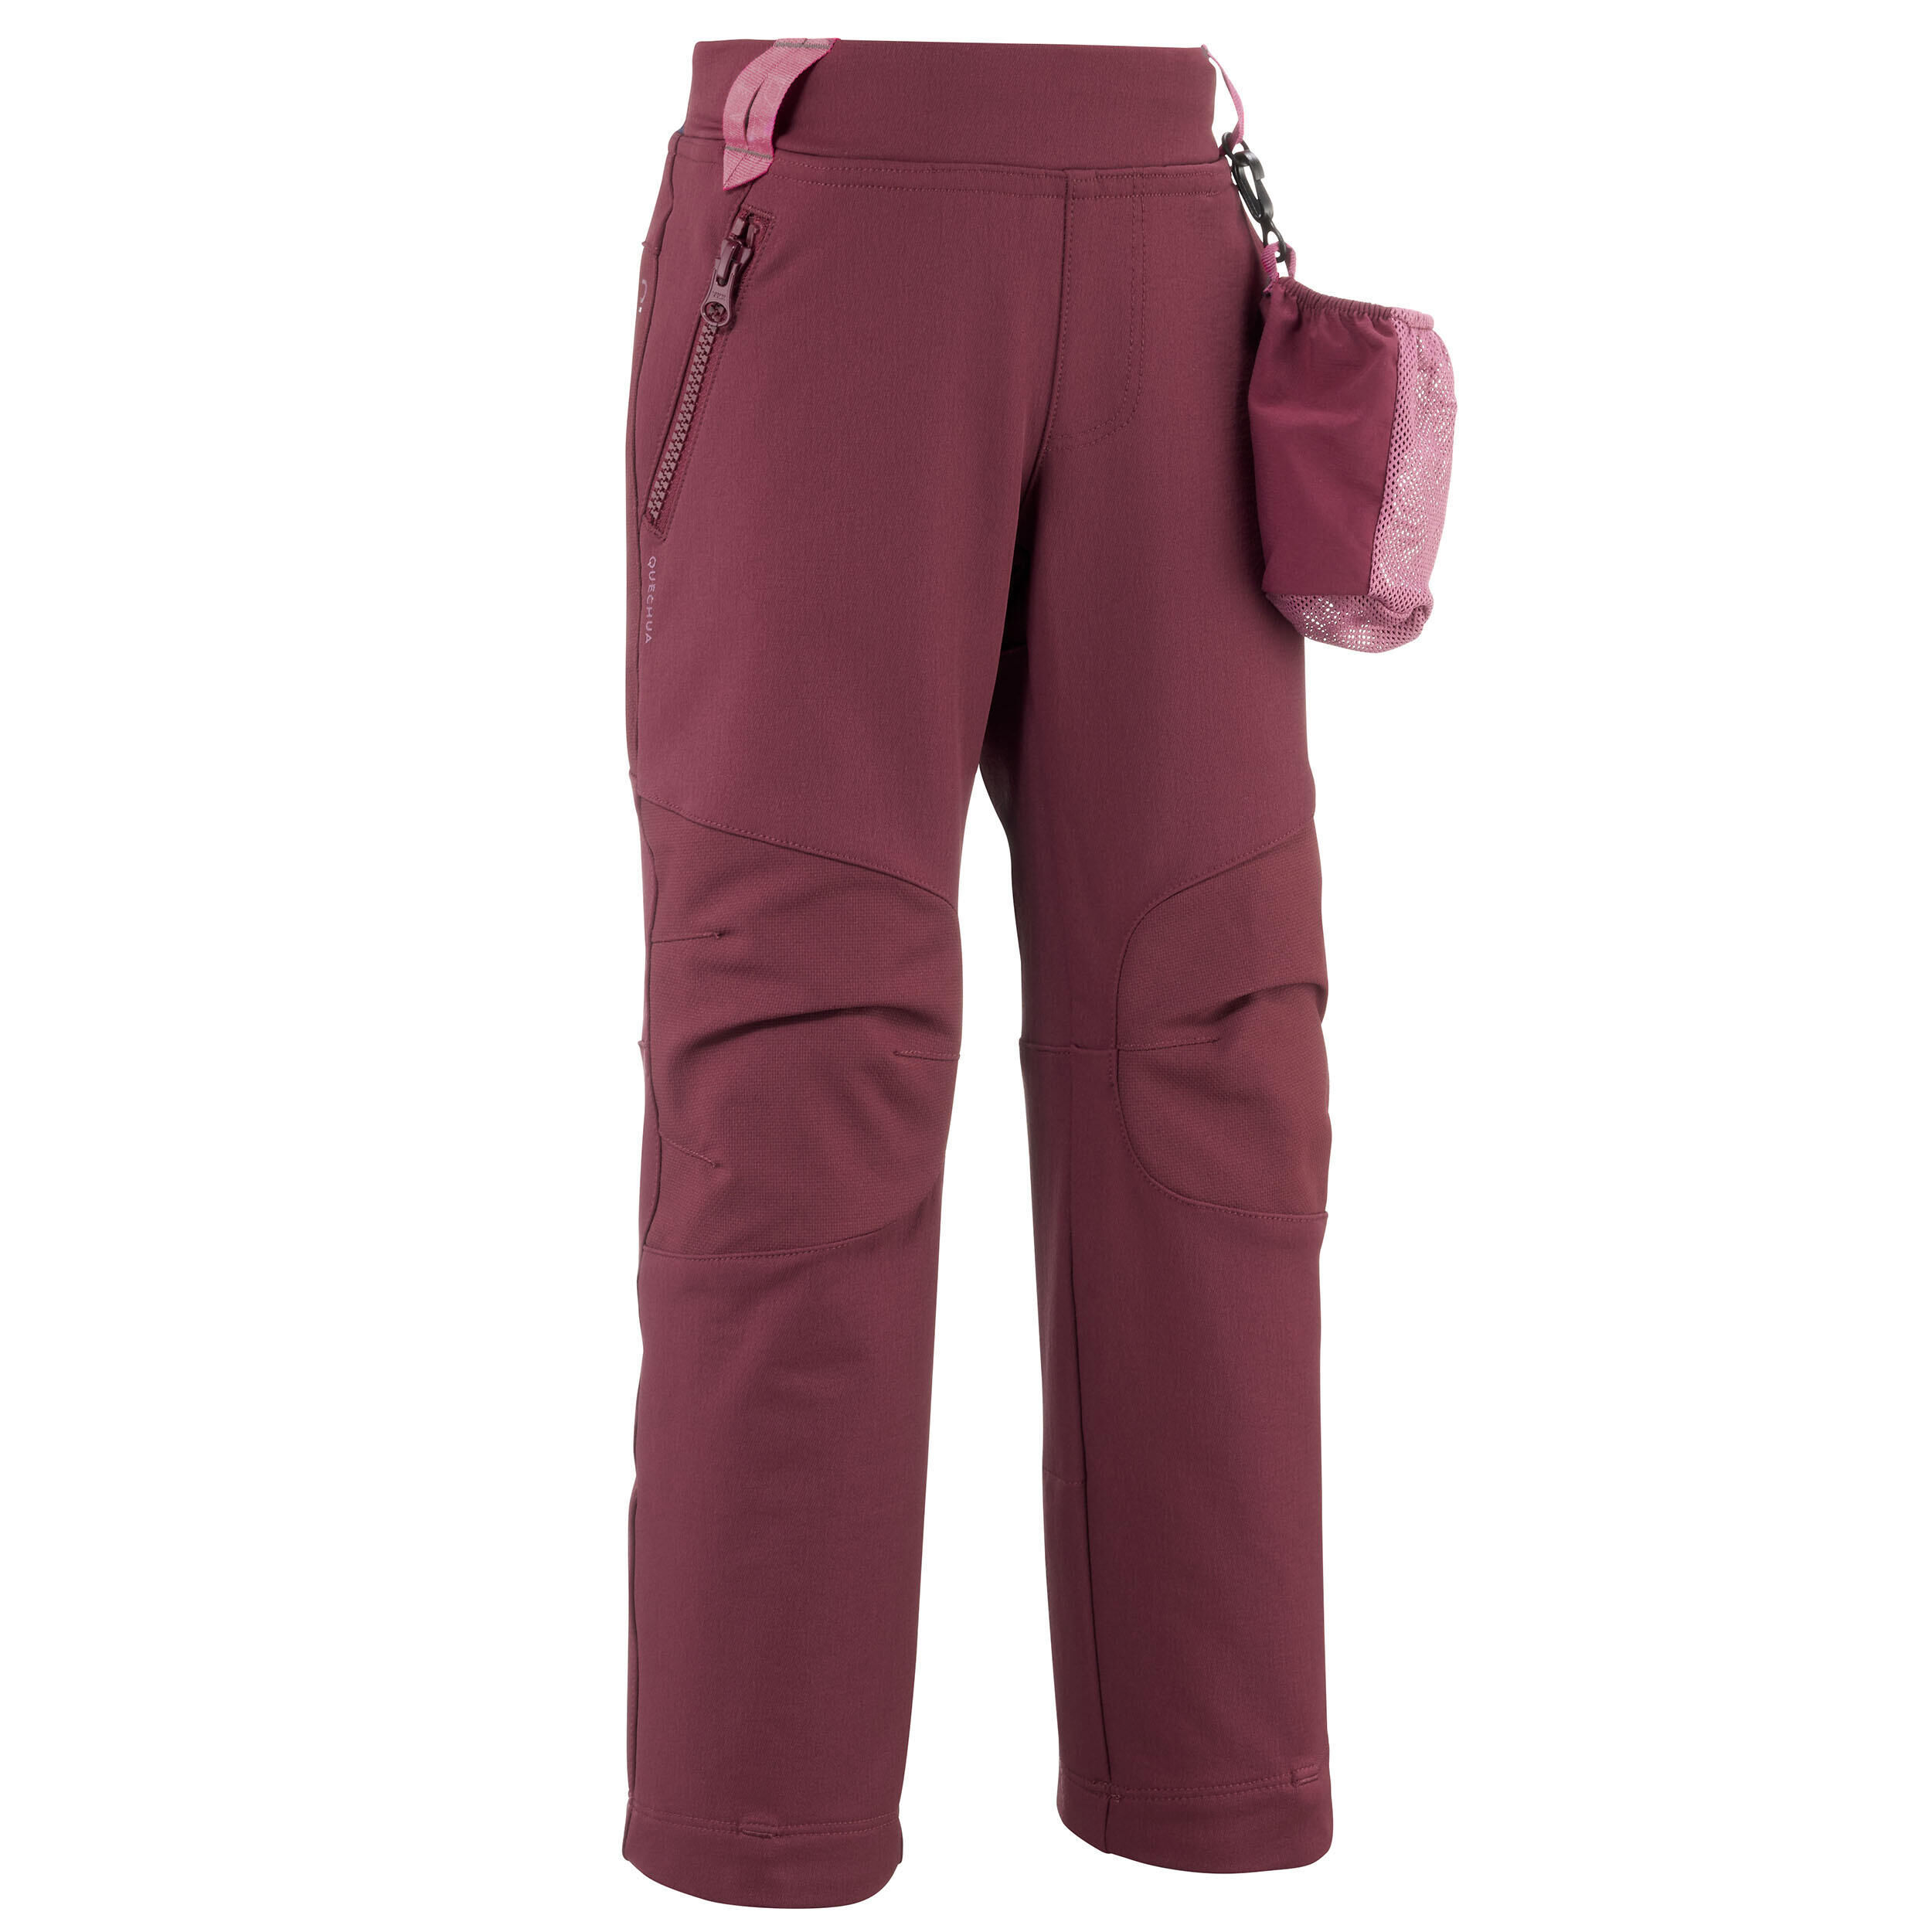 QUECHUA Kids’ Softshell Hiking Trousers - MH550 - Aged 2-6 - Purple